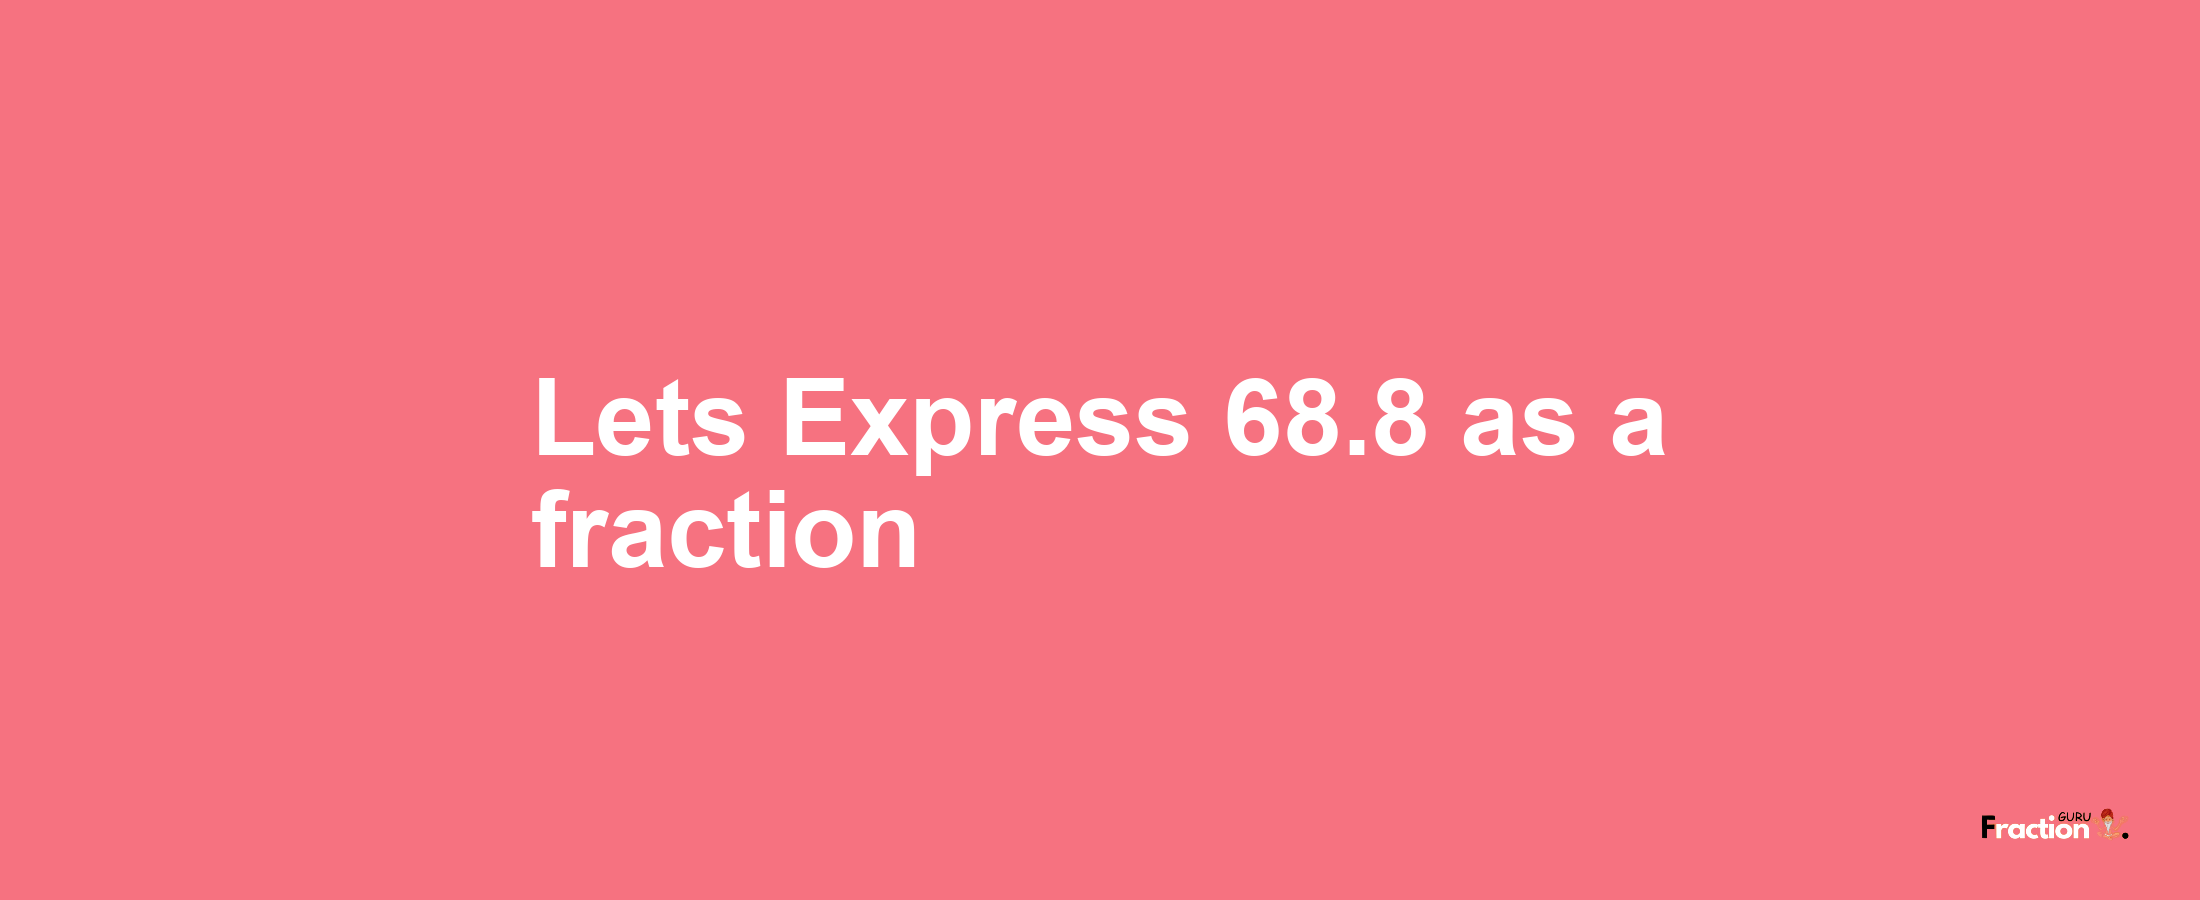 Lets Express 68.8 as afraction